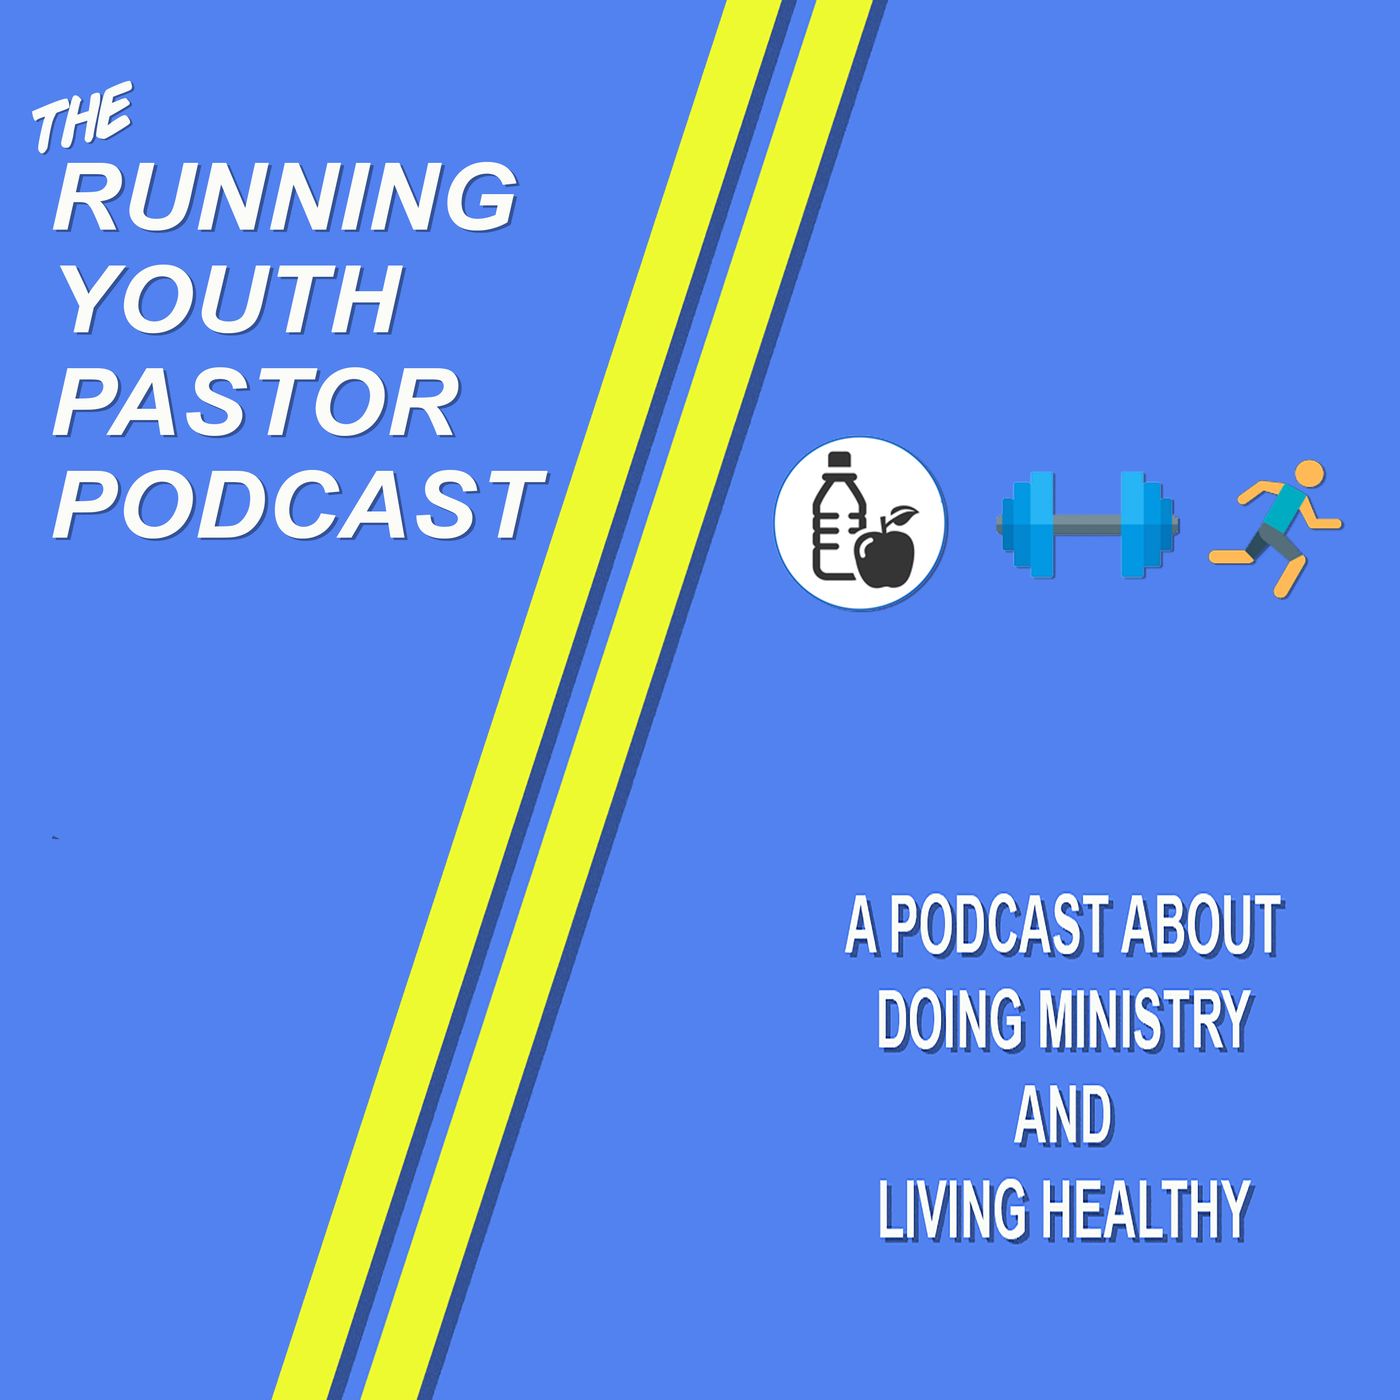 The Running Youth Pastor Podcast